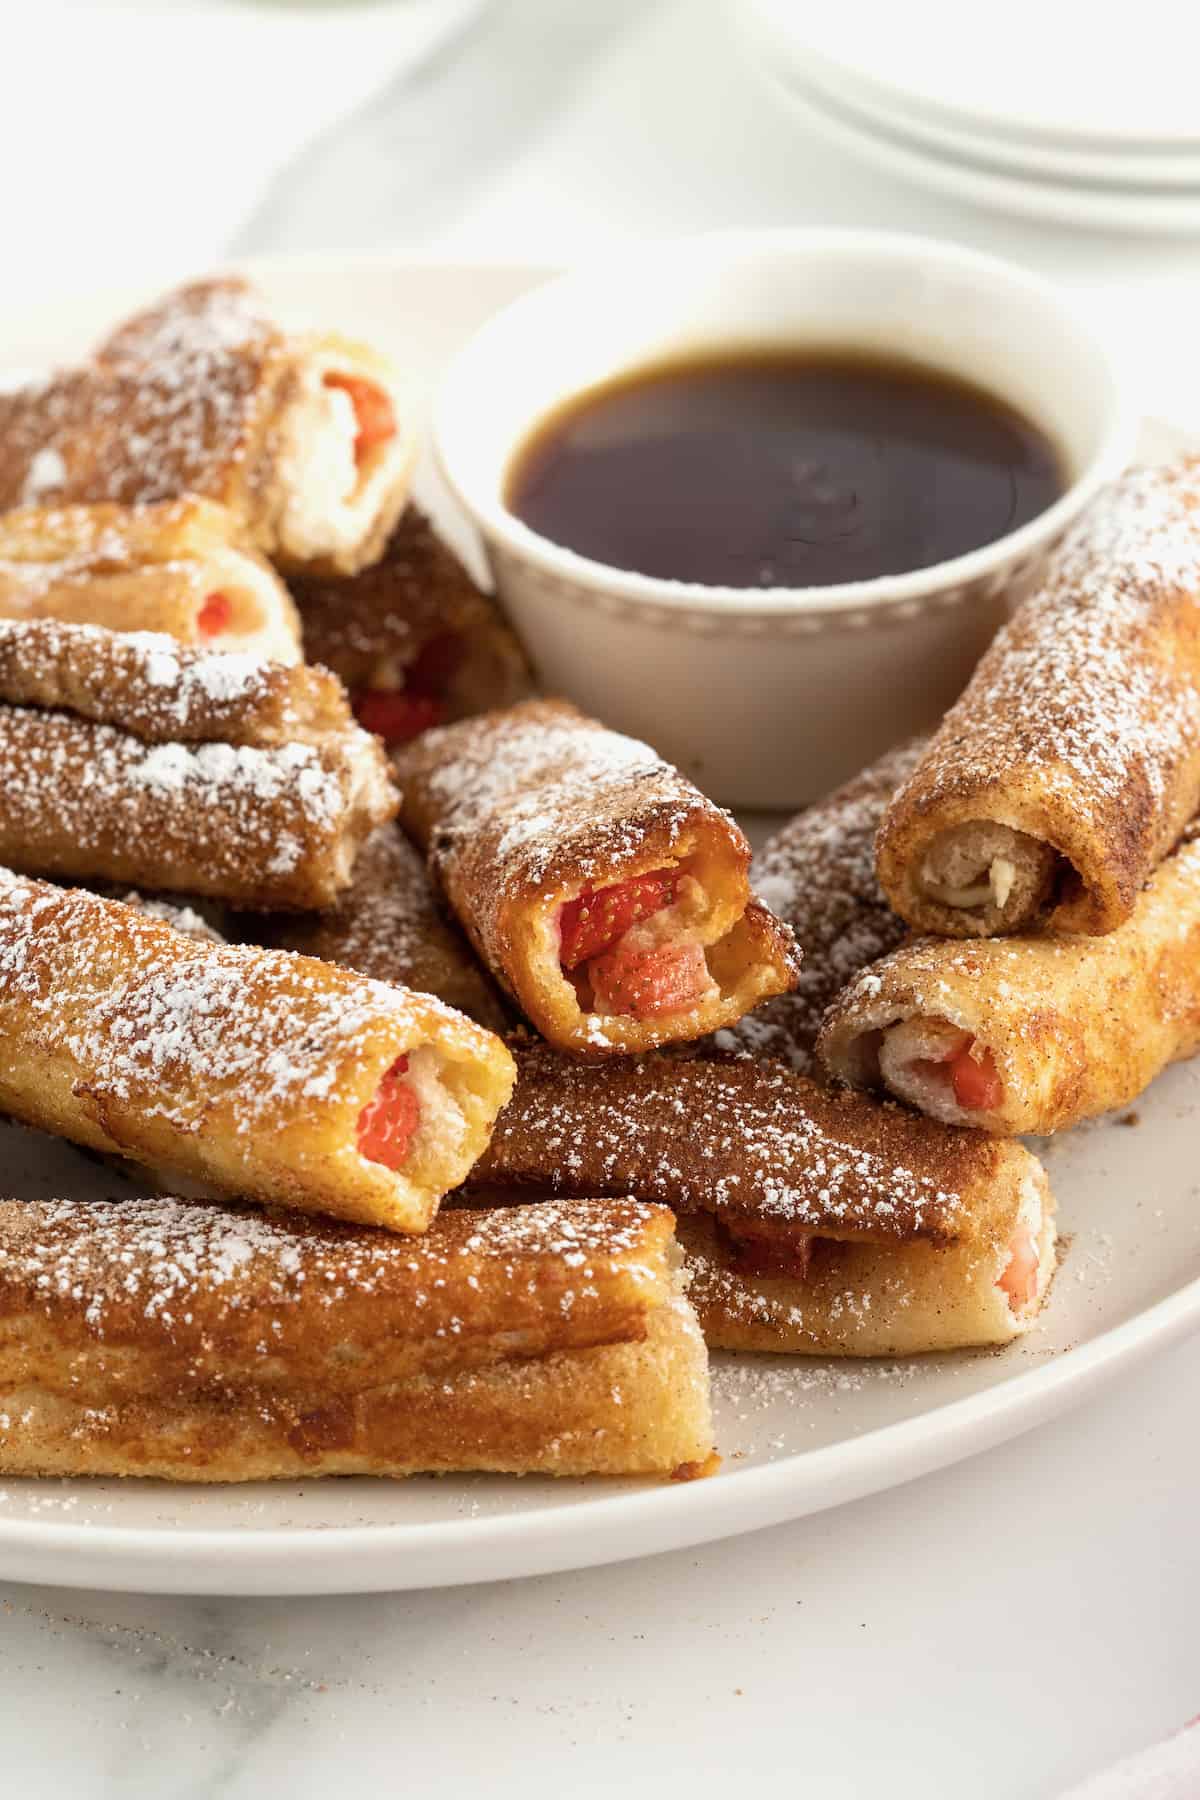 Strawberry Cream Cheese French Toast Roll Ups by The BakerMama